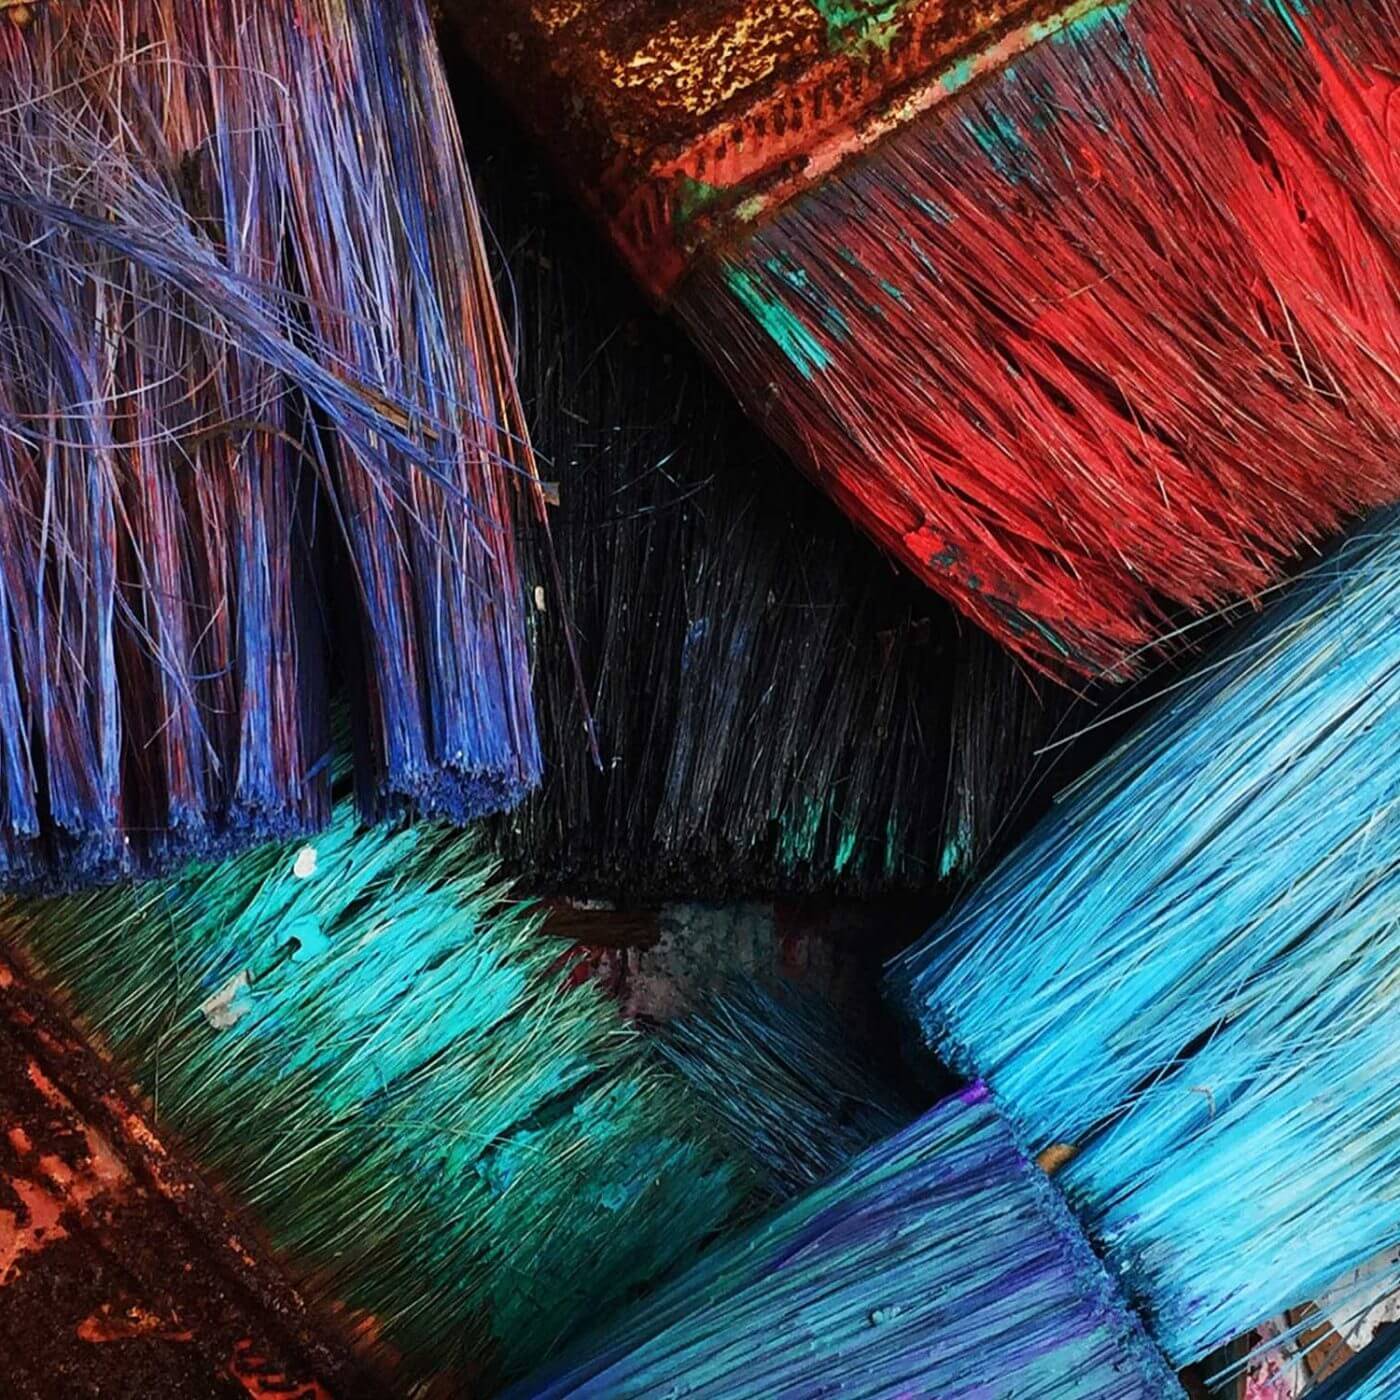 A closeup of paintbrushes with various colors of paint on them.